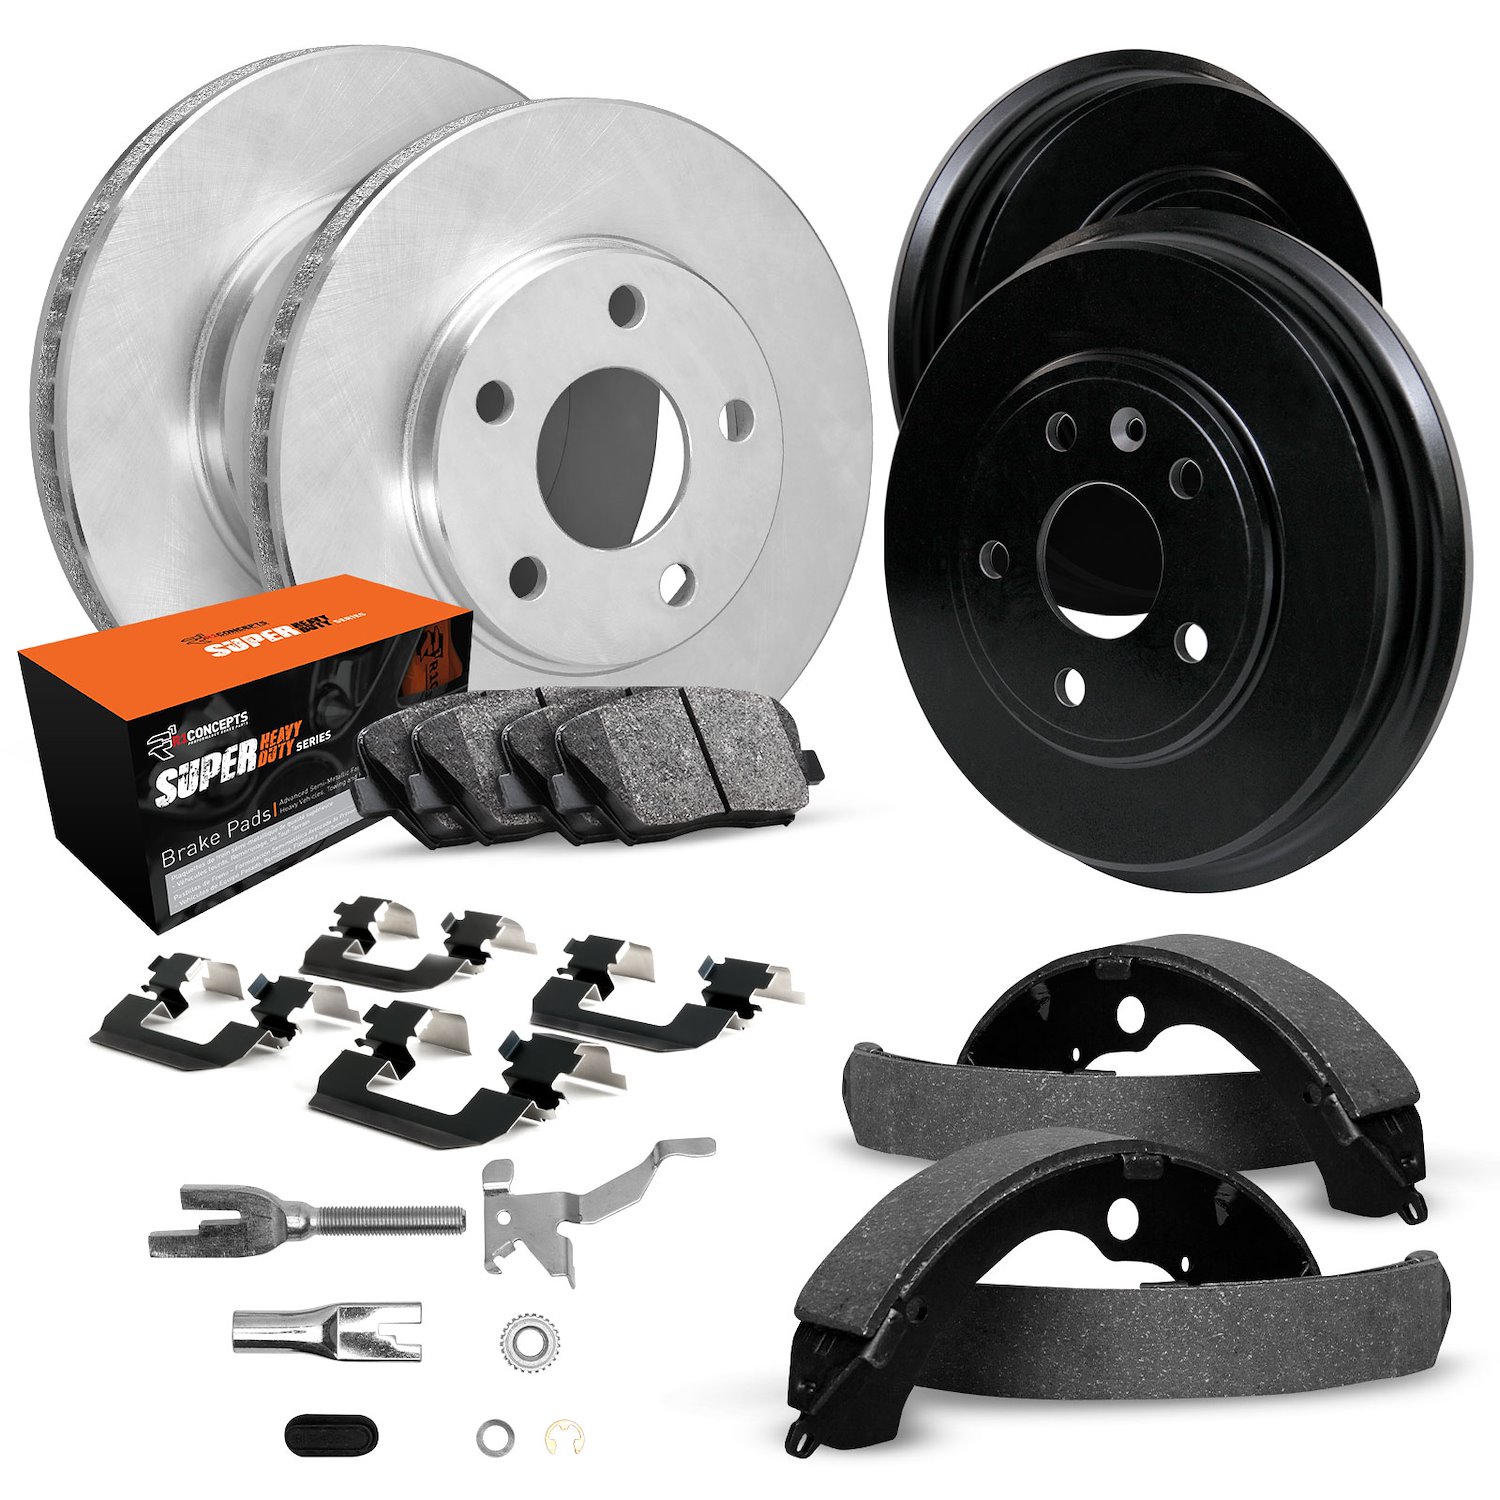 E-Line Blank Brake Rotor & Drum Set w/Super-Duty Pads, Shoes, Hardware, & Adjusters, 1990-1996 GM, Position: Front & Rear